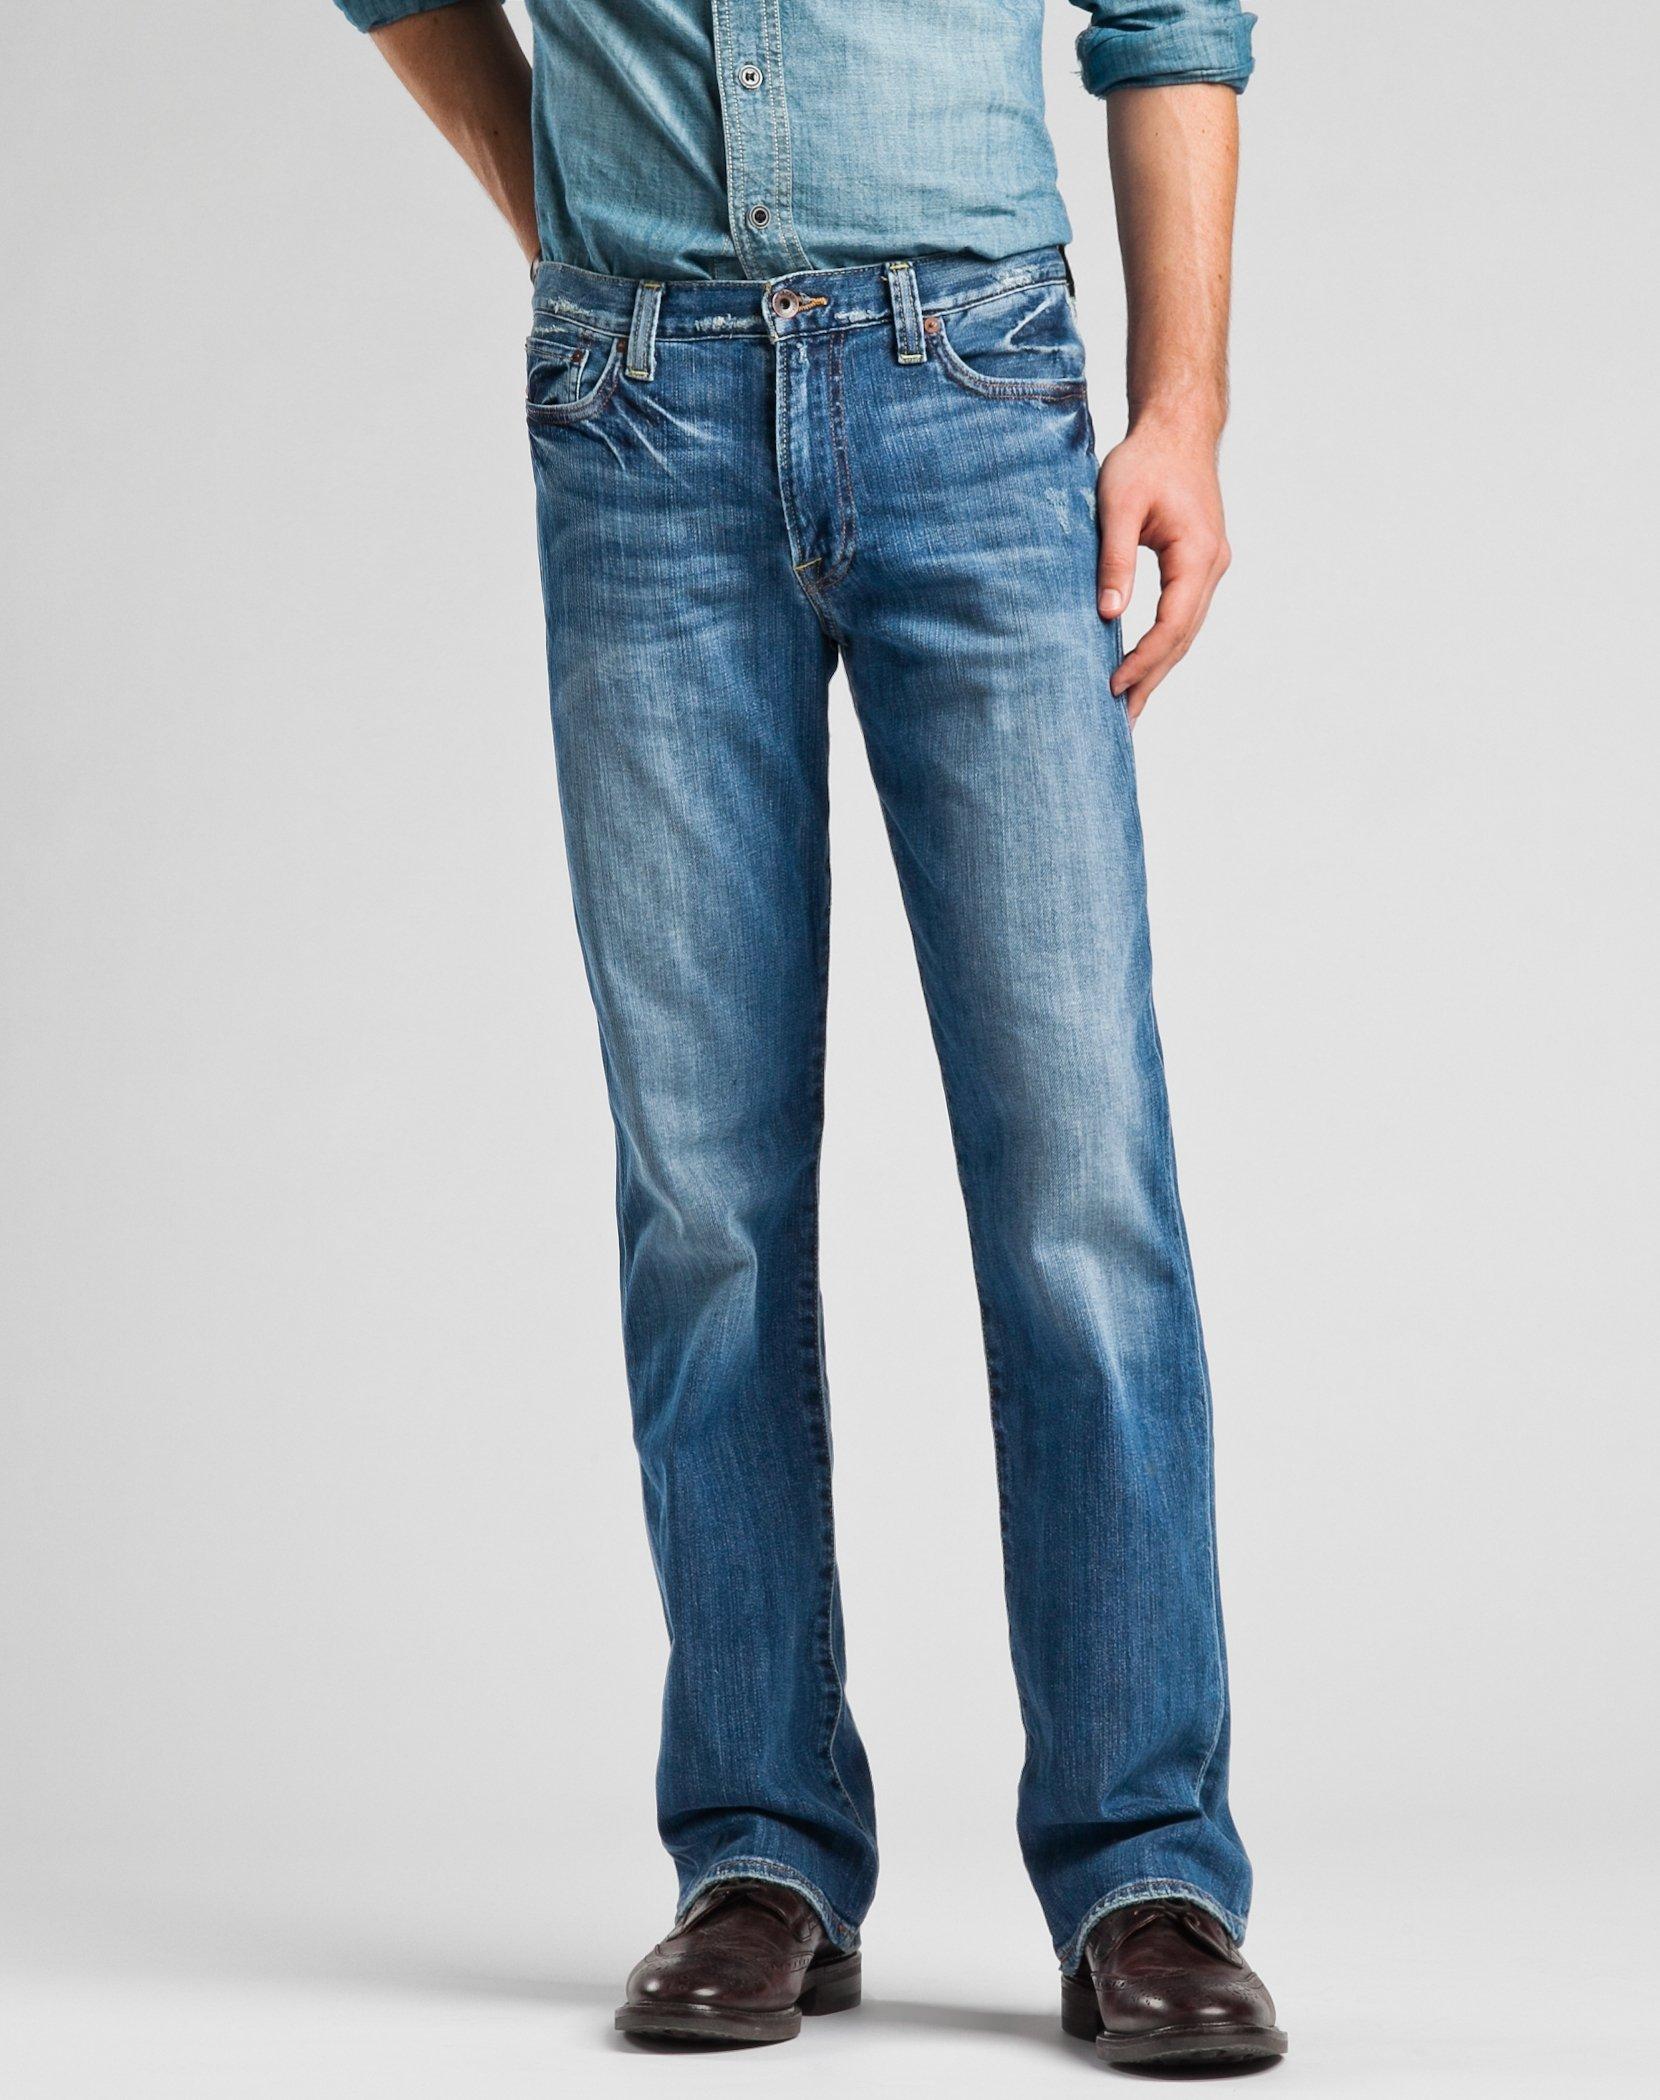 lucky 361 vintage straight jeans